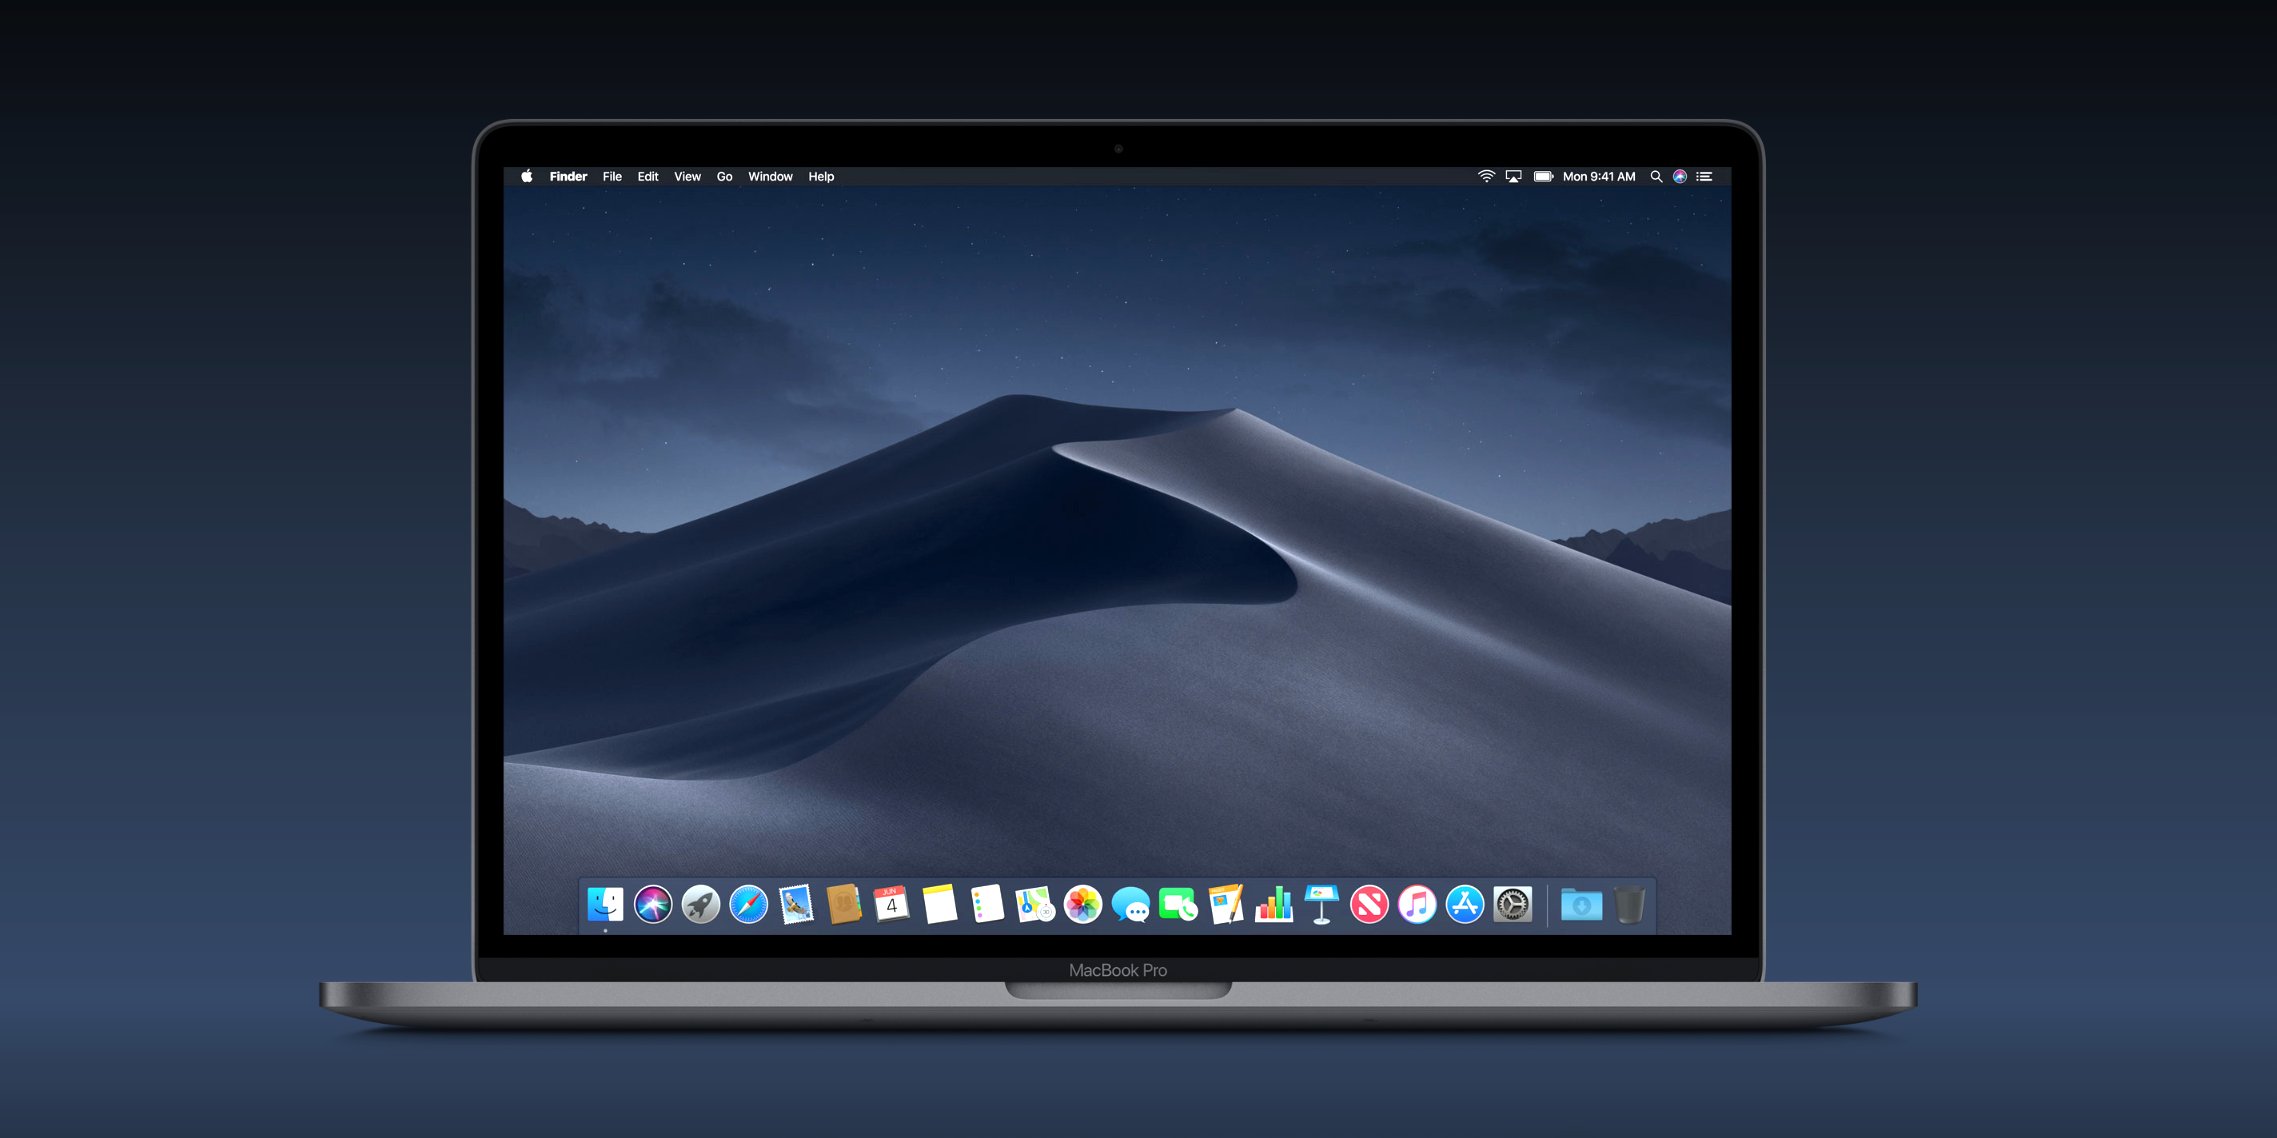 How to hide Finder Preview Pane in macOS Mojave